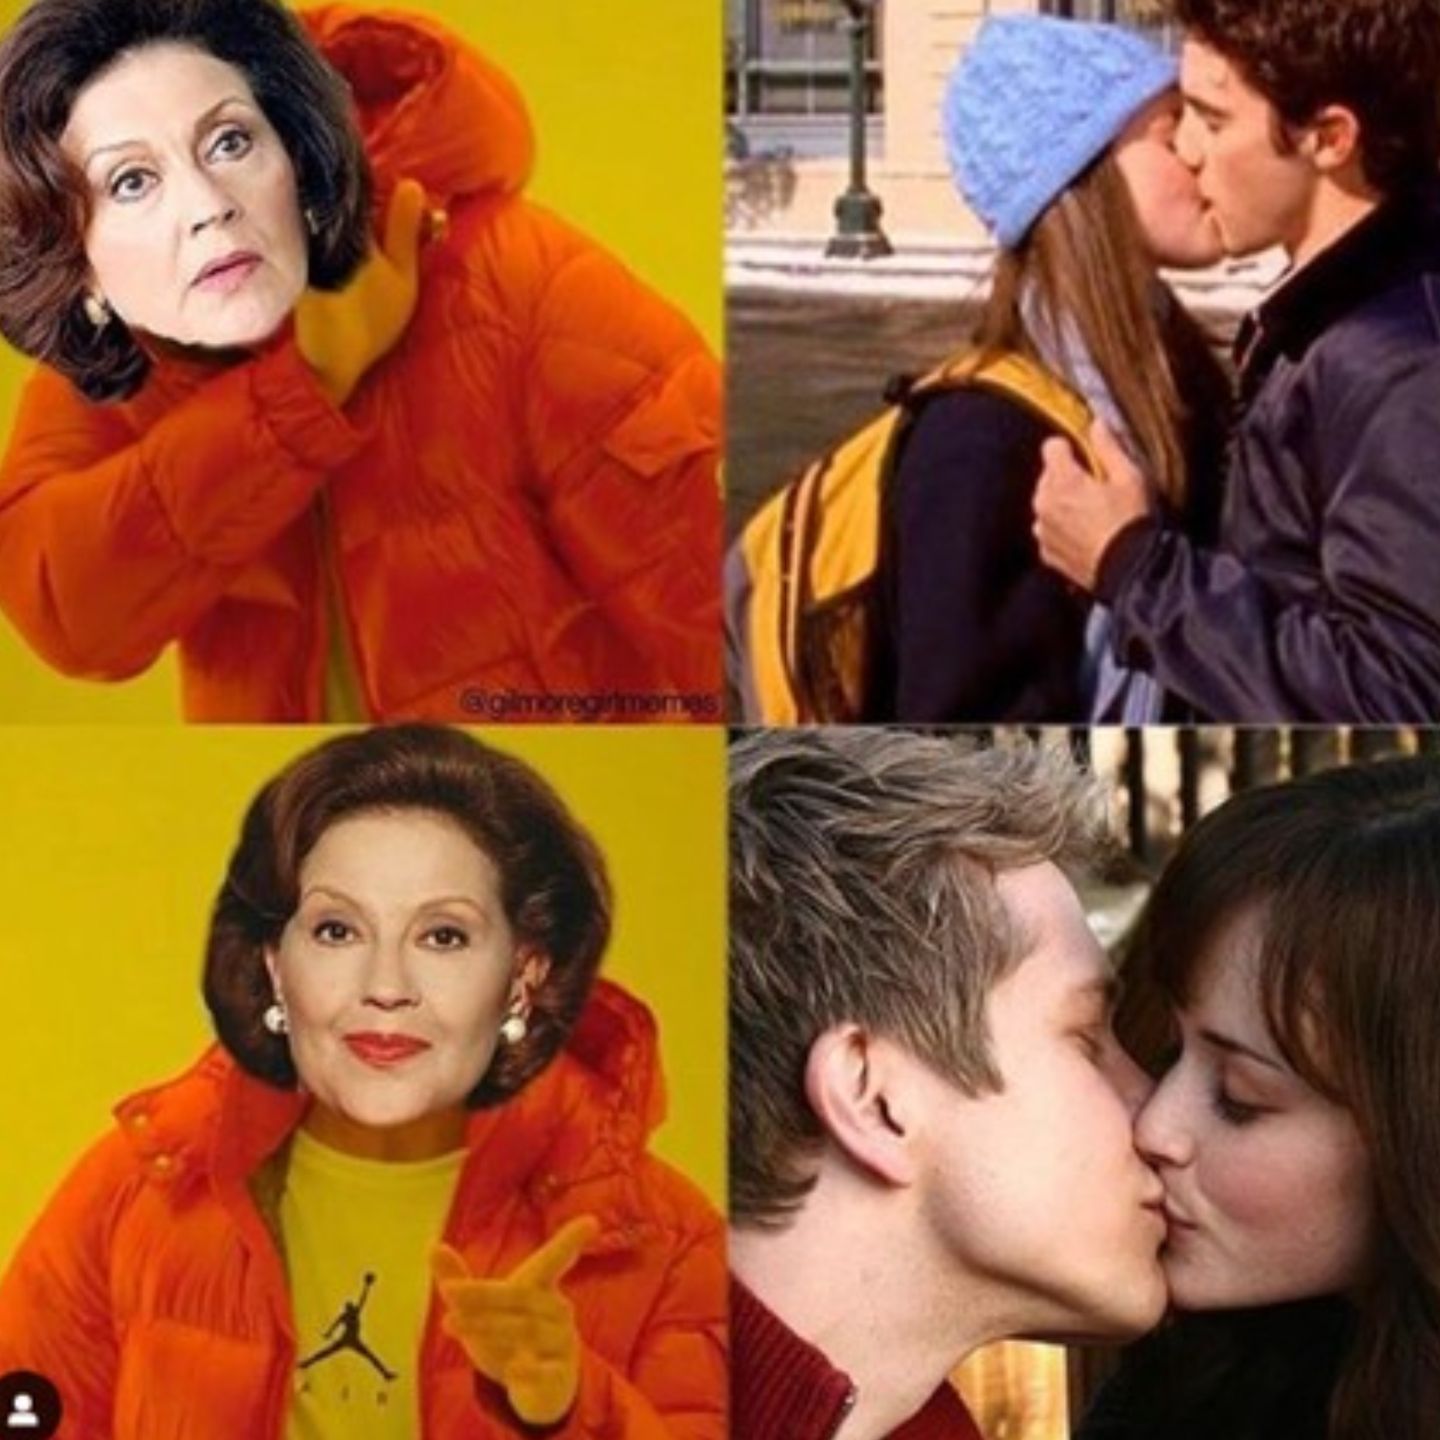 Meme about Emily Gilmore only approving of Logan as Rory's boyfriend in Gilmore Girls. 